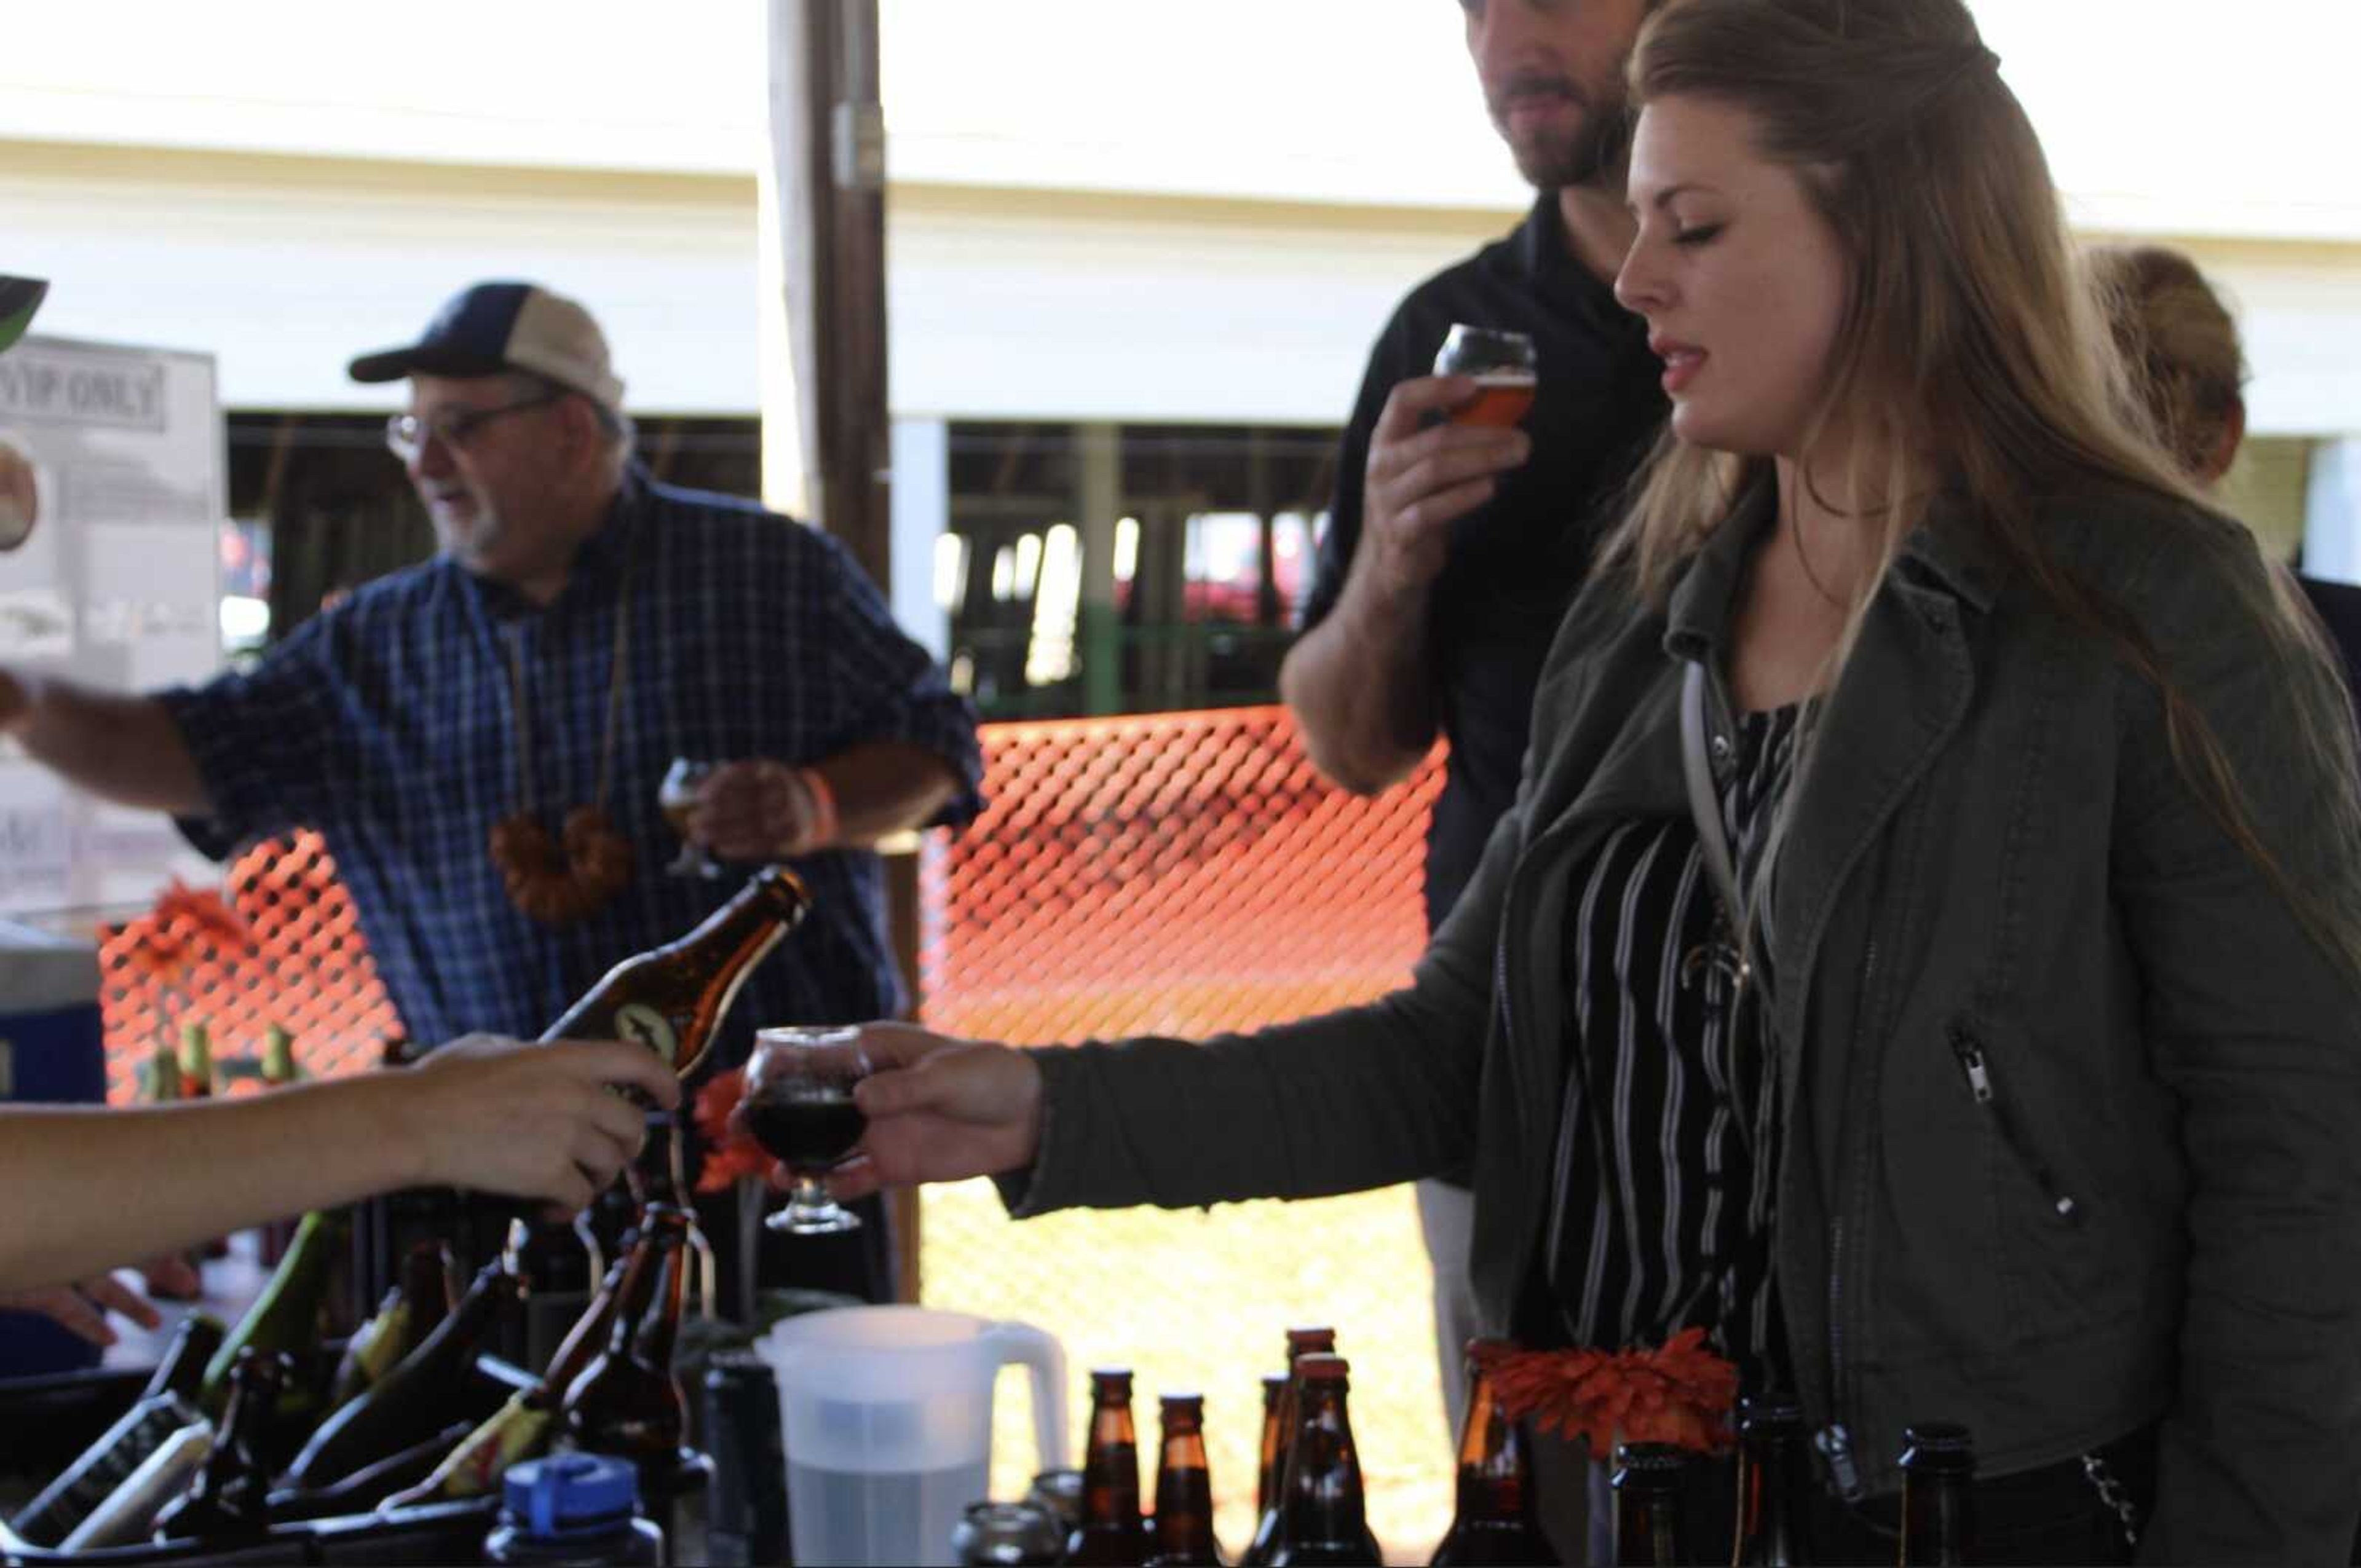 Lauryn Pedroza sampling beer in the VIP tent at the Craft Beer Festival on Sept. 29